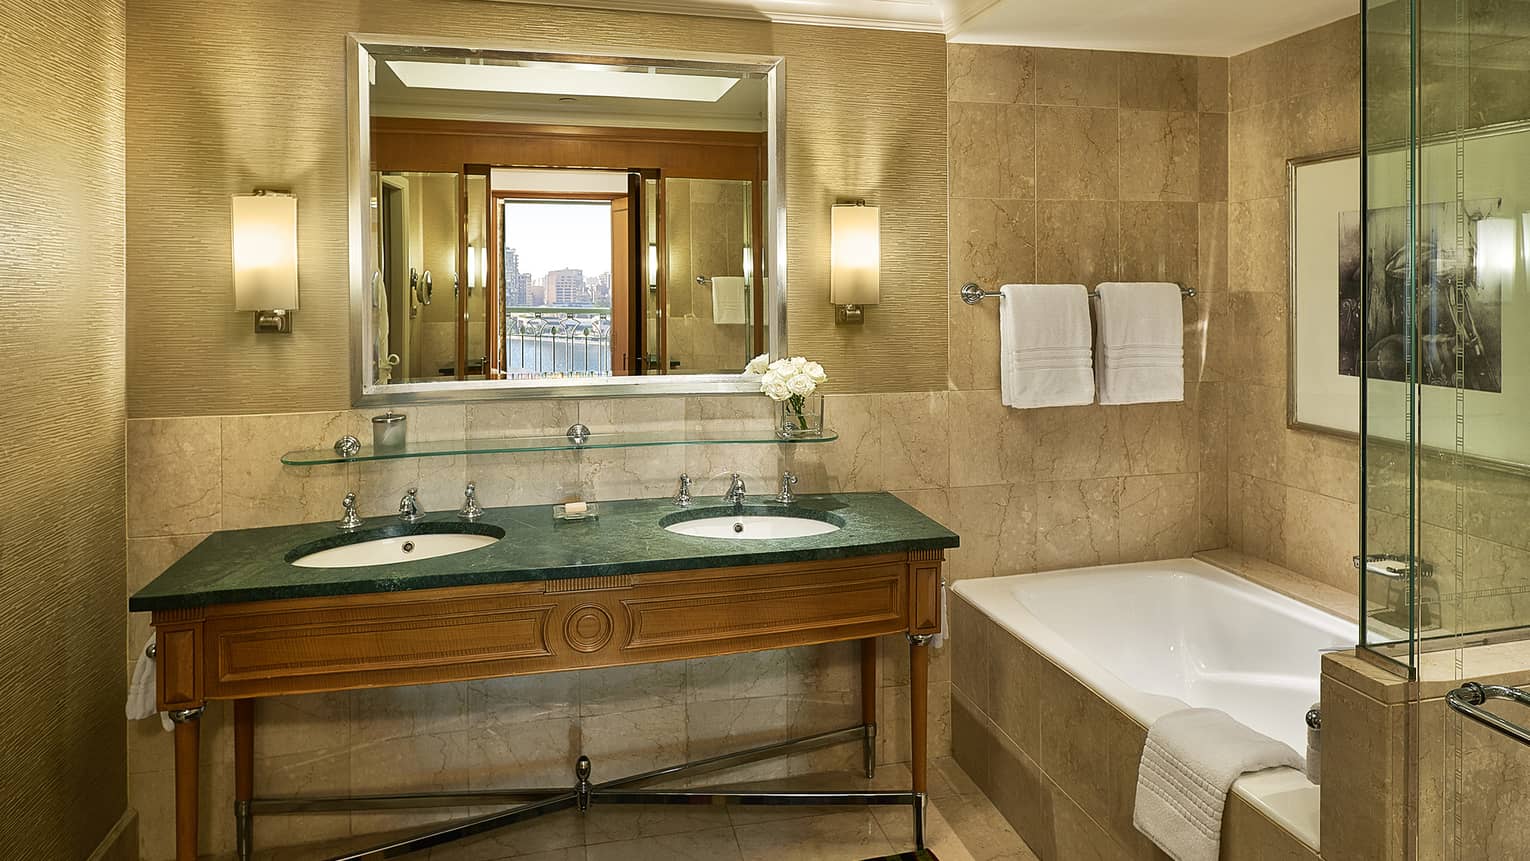 Guest room bathroom with double green granite?topped vanity, deep soaking tub,  mirror flanked by lighted wall sconces, glass shower